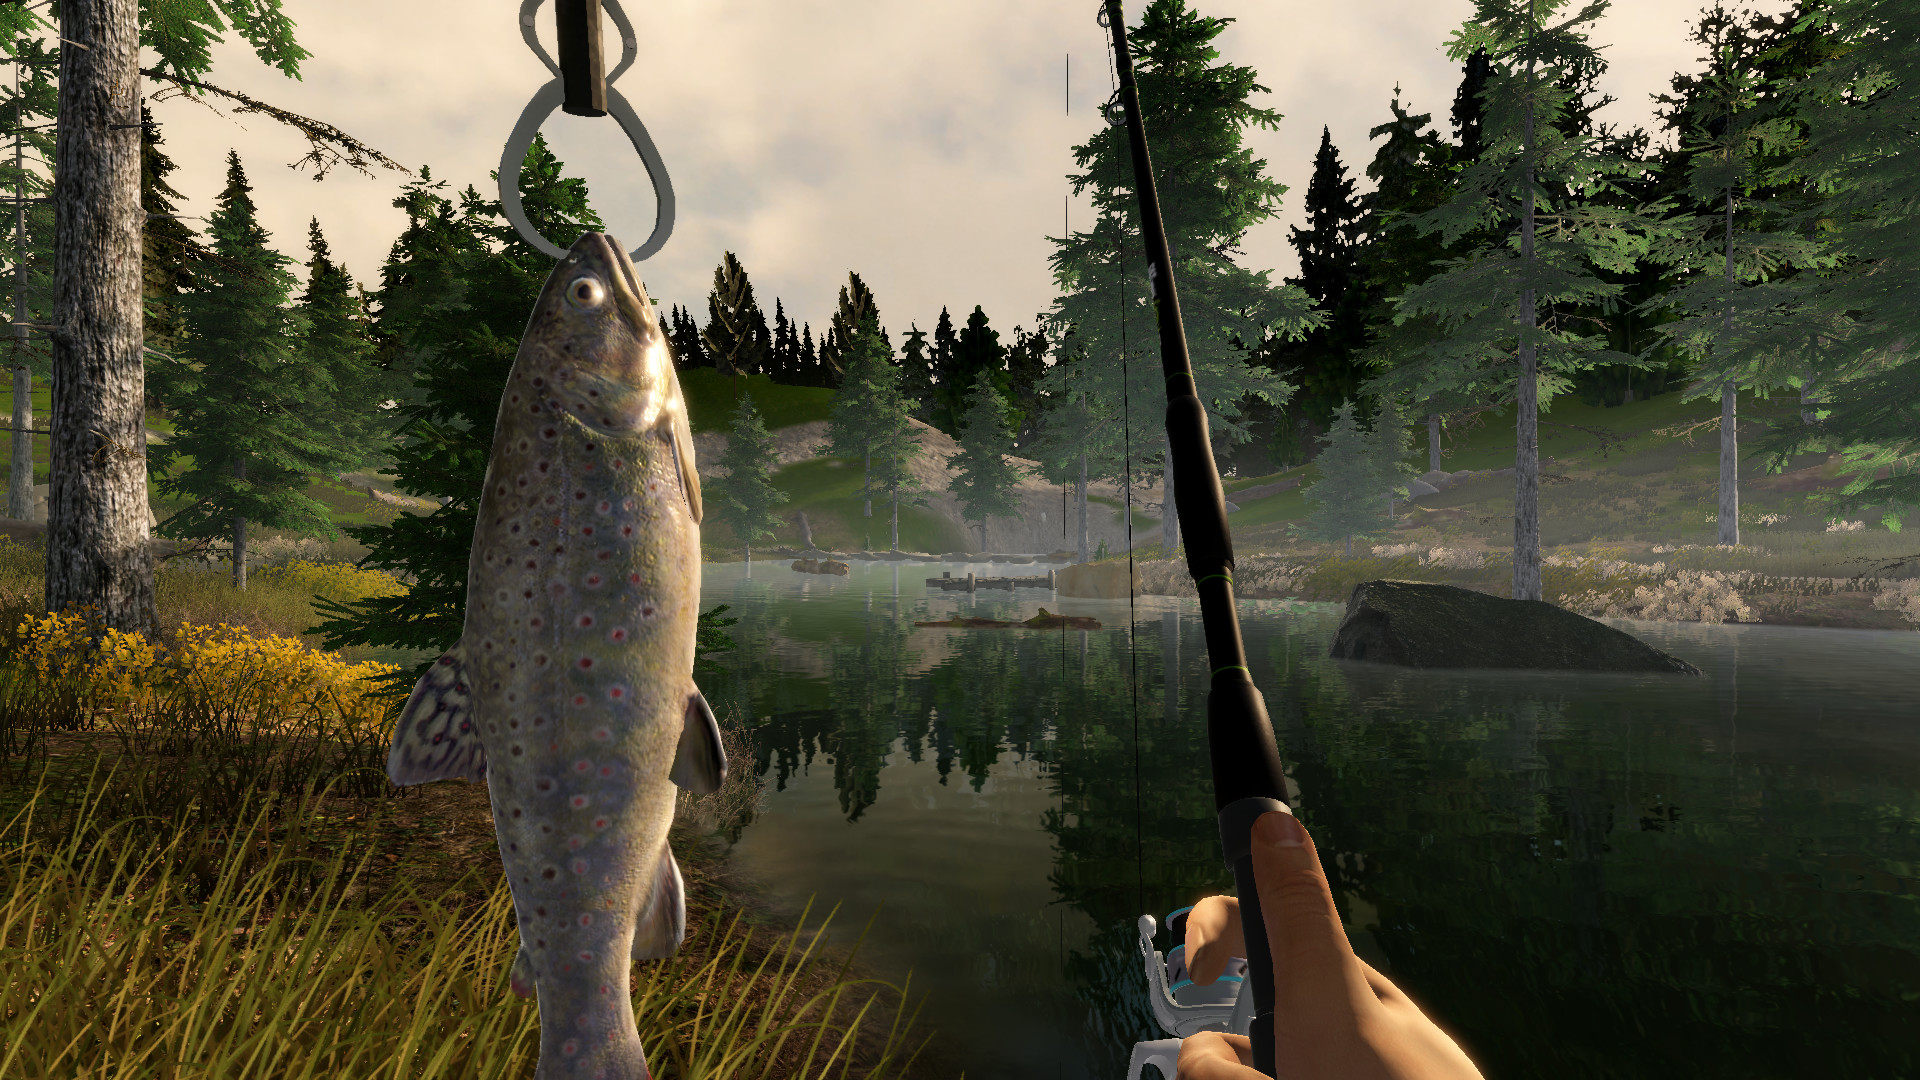 The Best Fishing Games Of All Time, Ranked